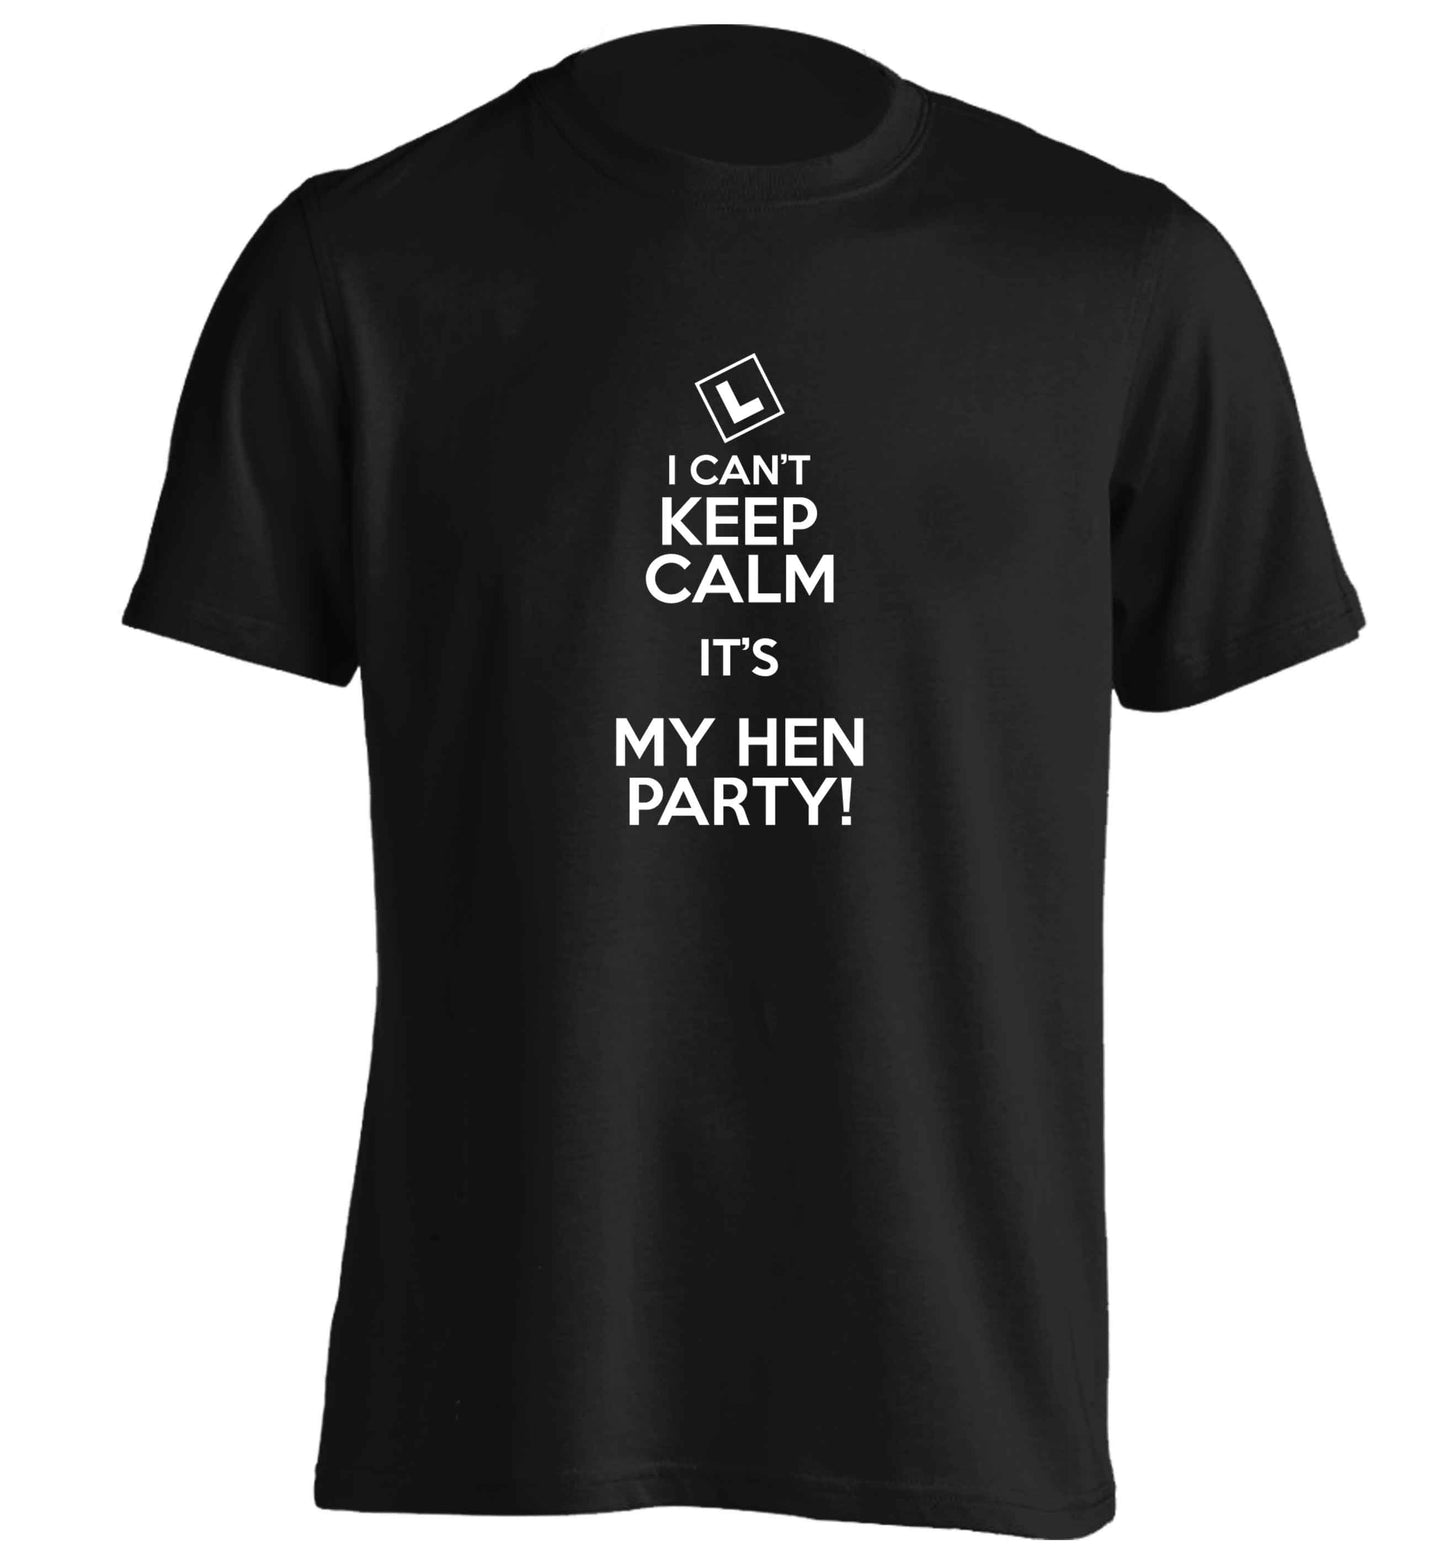 I can't keep calm it's my hen party adults unisex black Tshirt 2XL